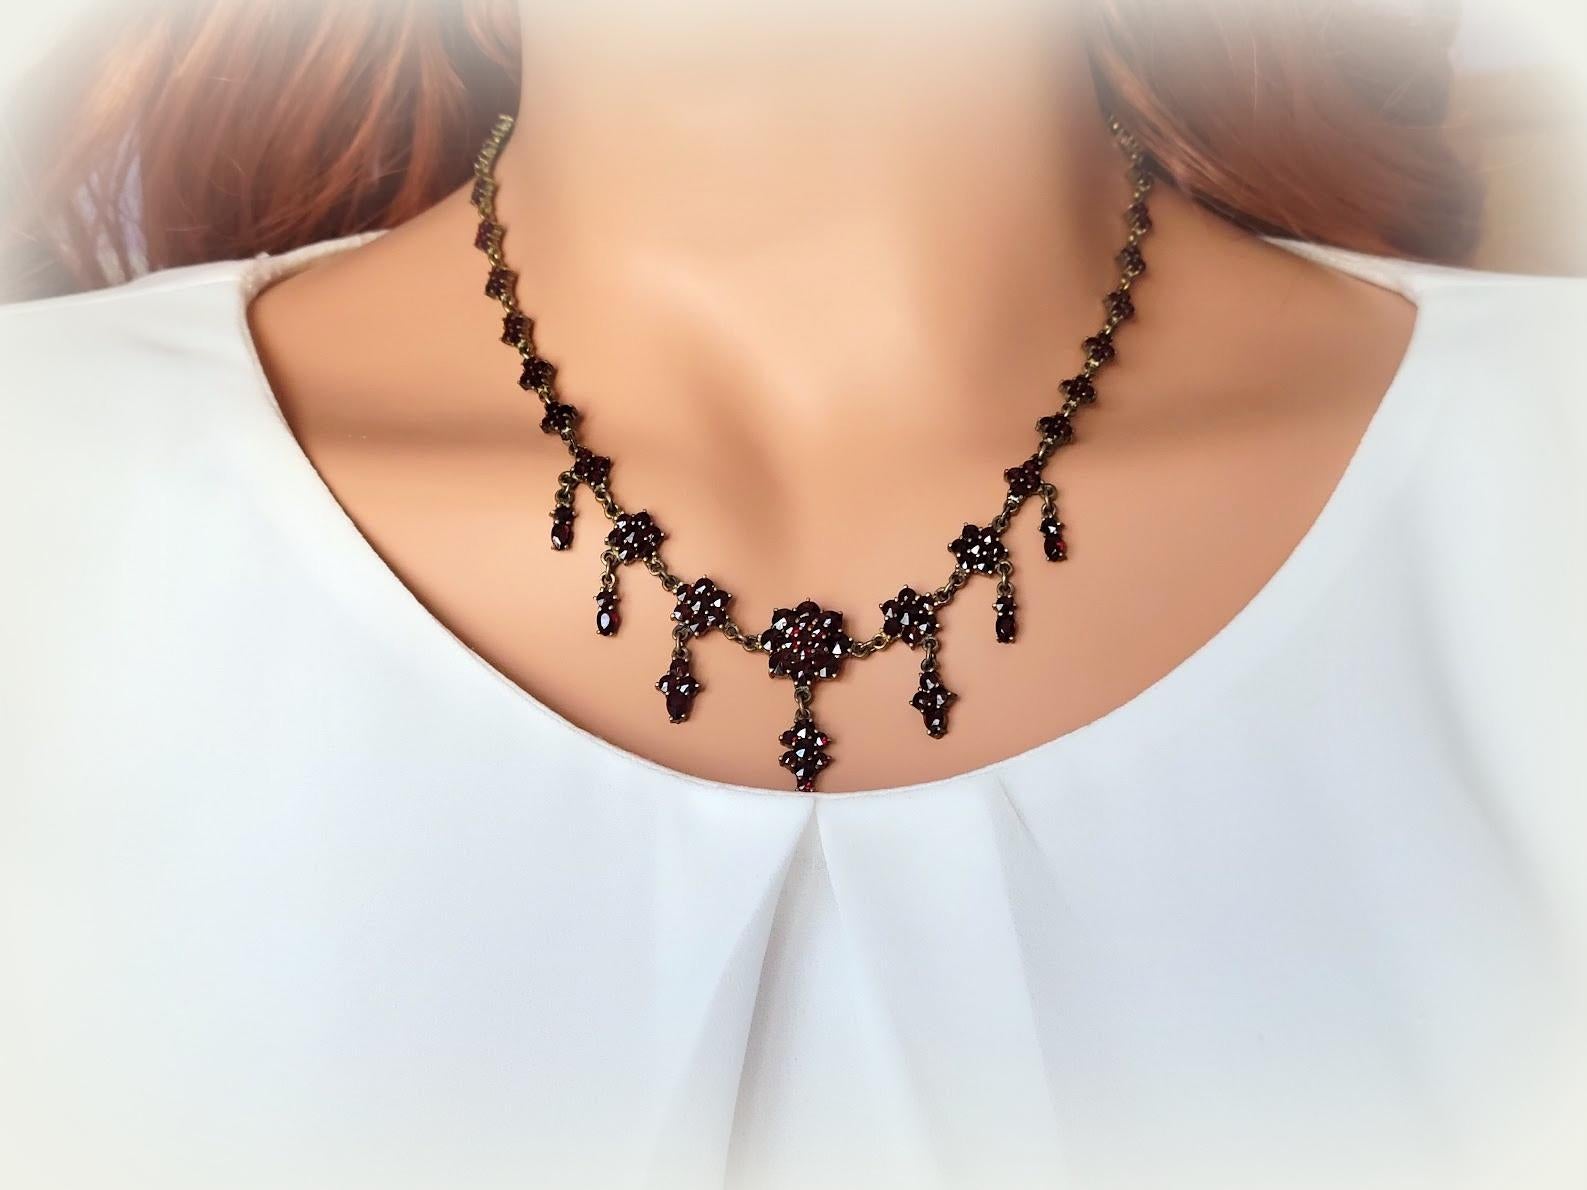 Presenting an exquisite Victorian festoon garnet necklace measuring 18 inches (46cm) in length. The necklace showcases a captivating display of pyrope garnets, renowned for their deep red hue, commonly known as 